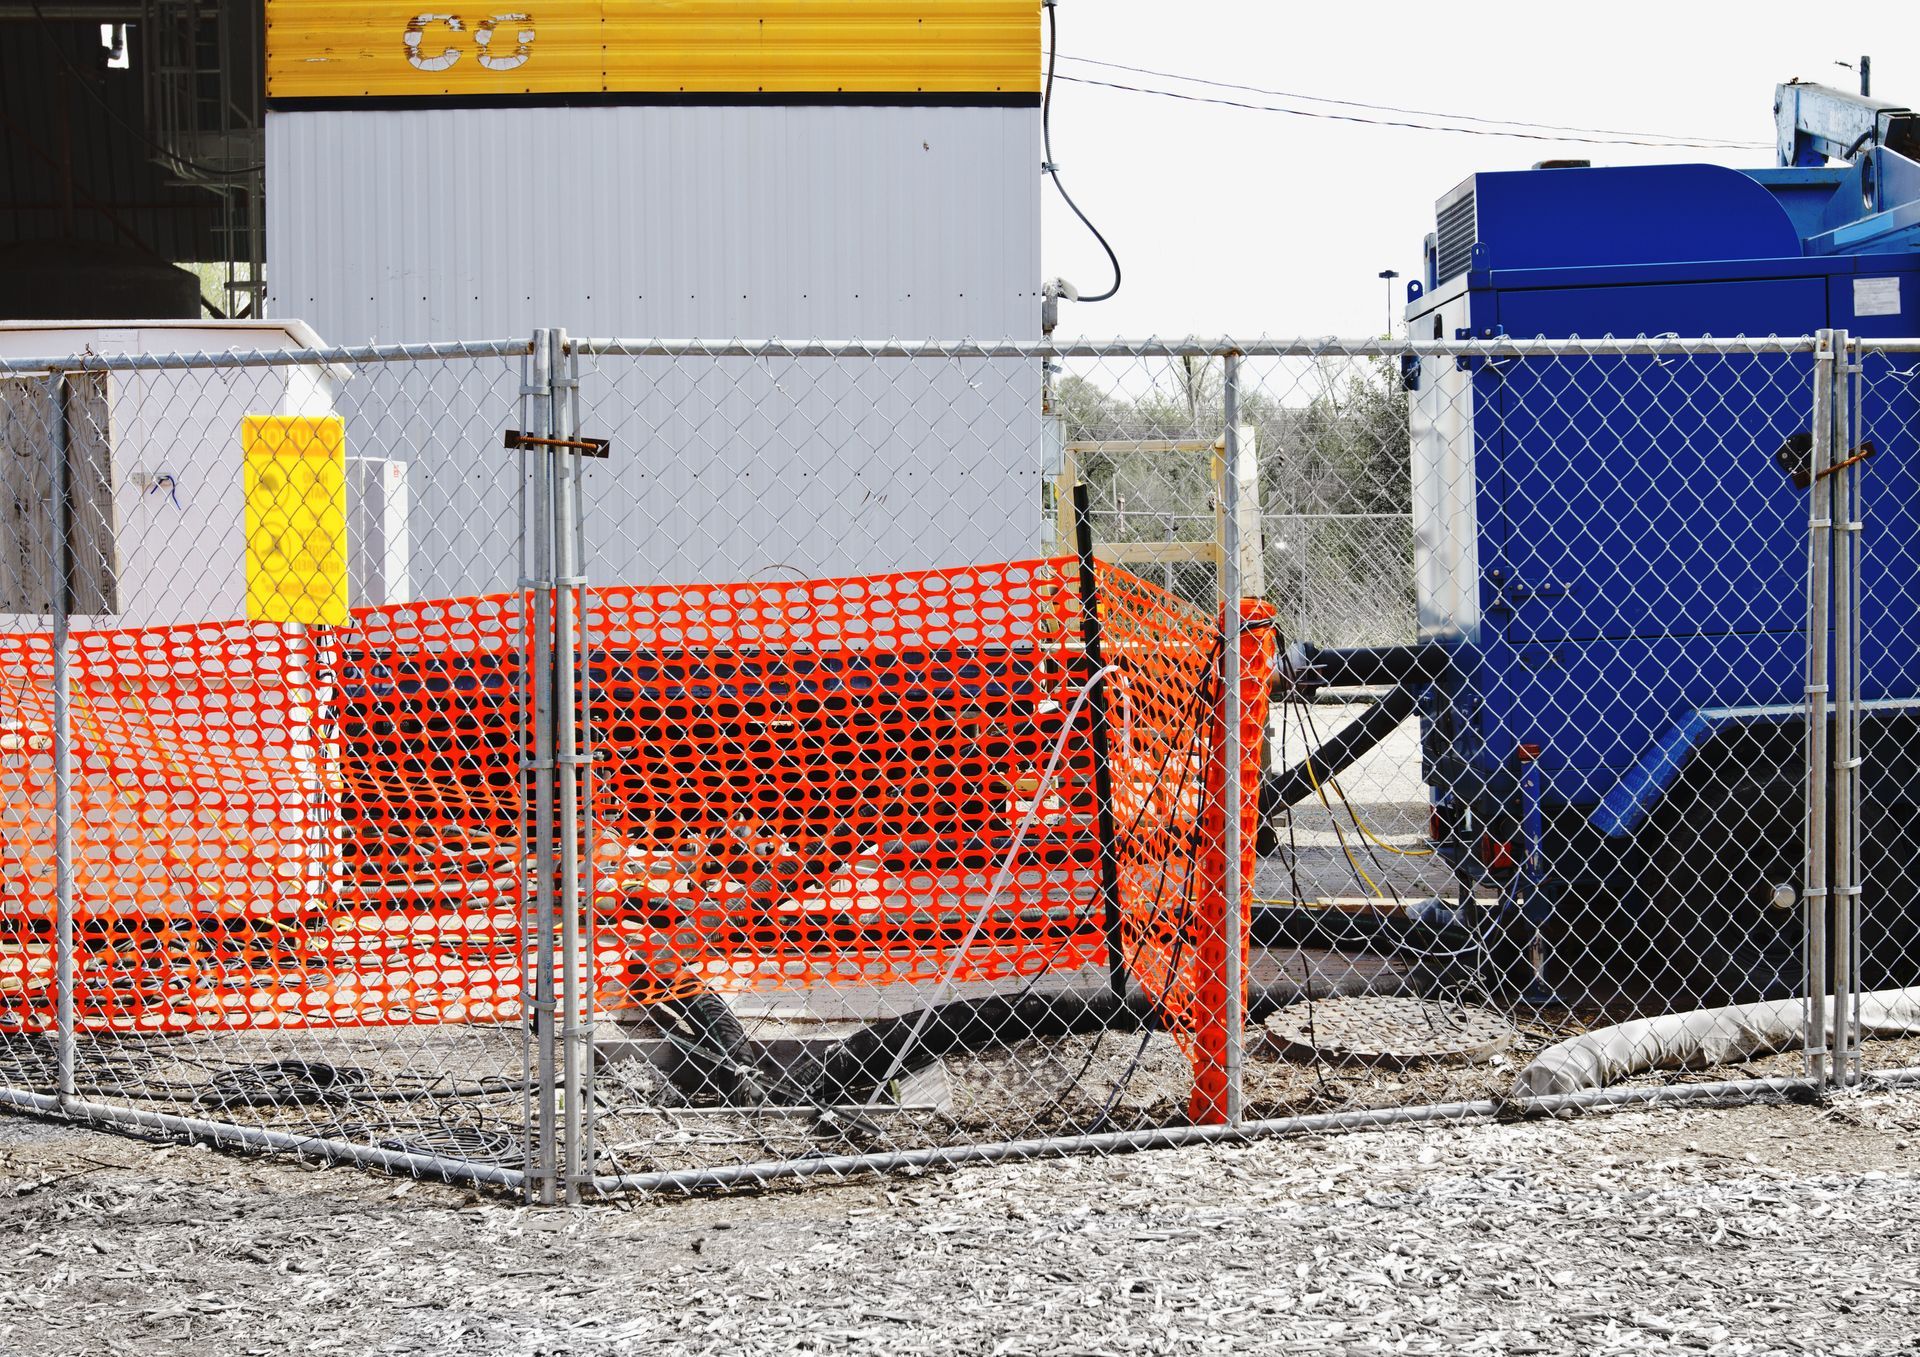 a chain link fence surrounds a construction site with a blue dumpster in the background